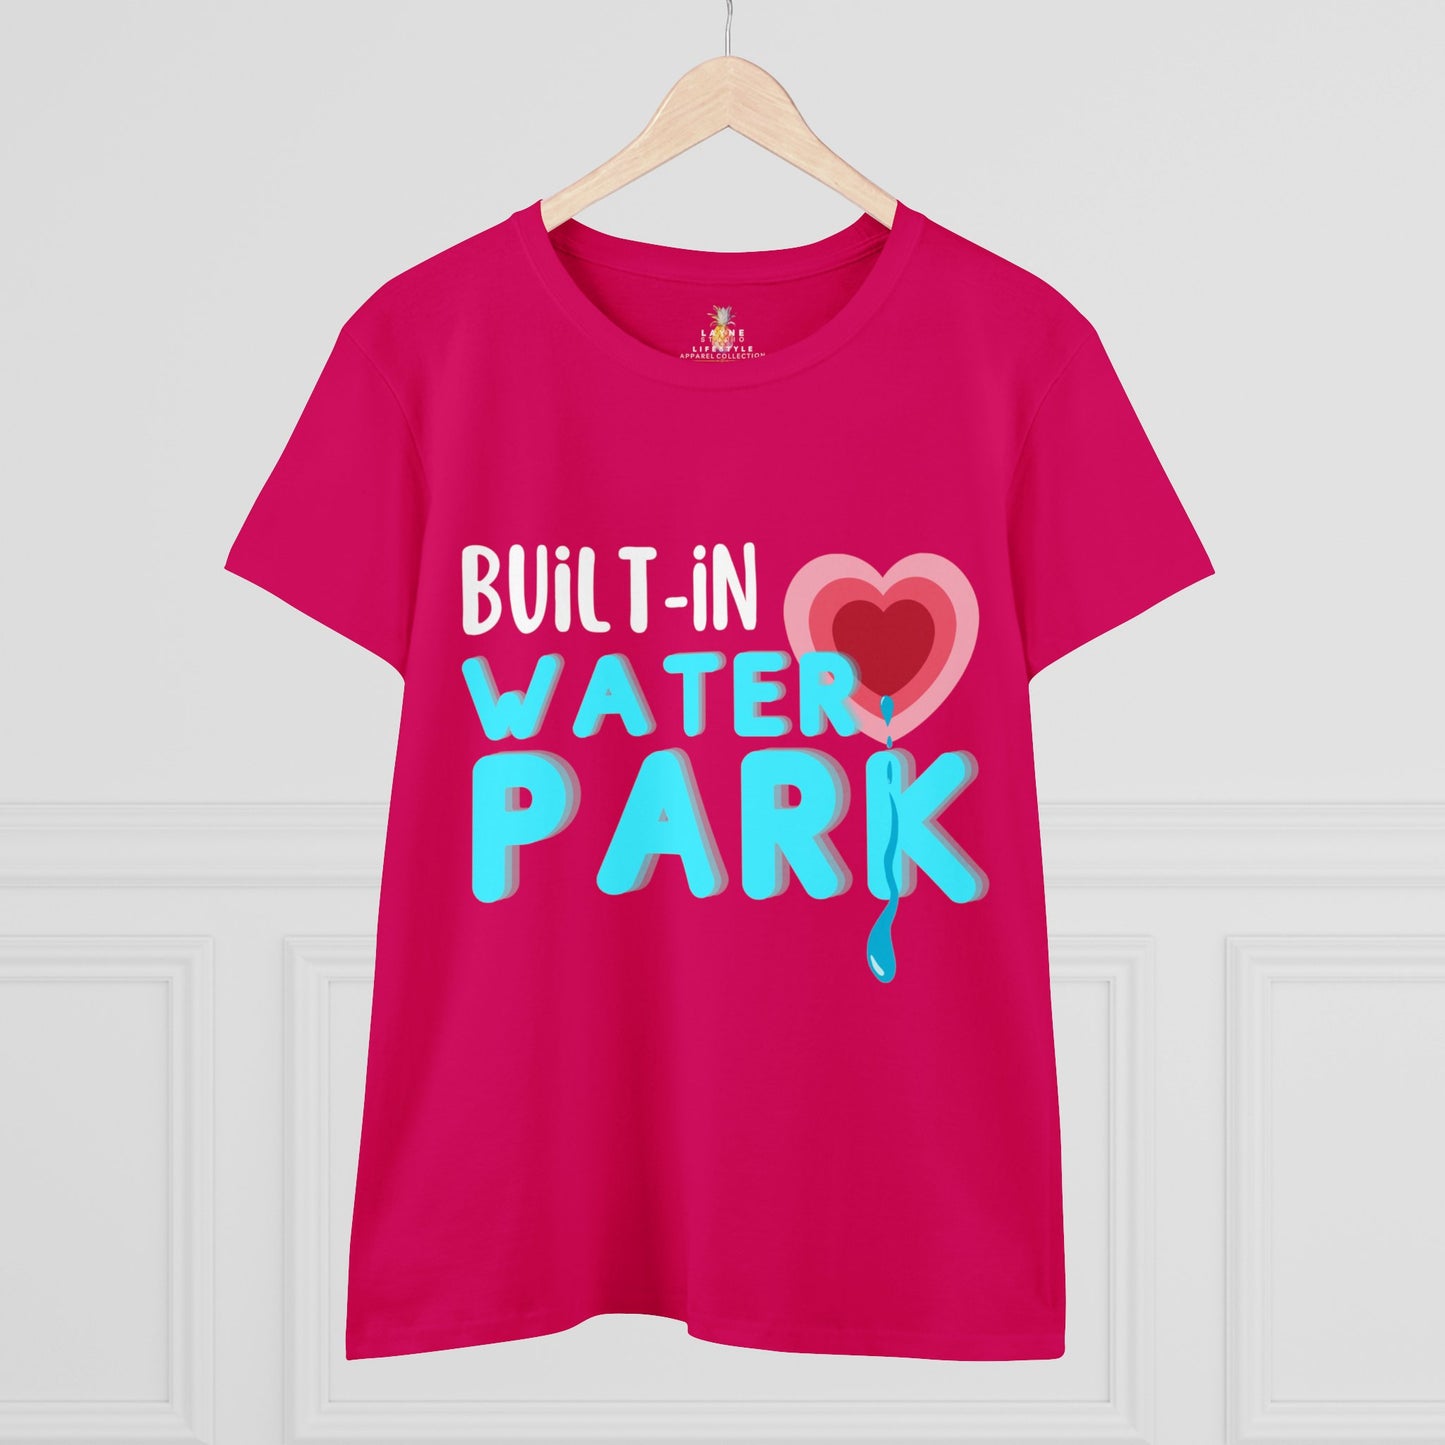 "Built-In Water Park" Graphic Women's Midweight Cotton Tee